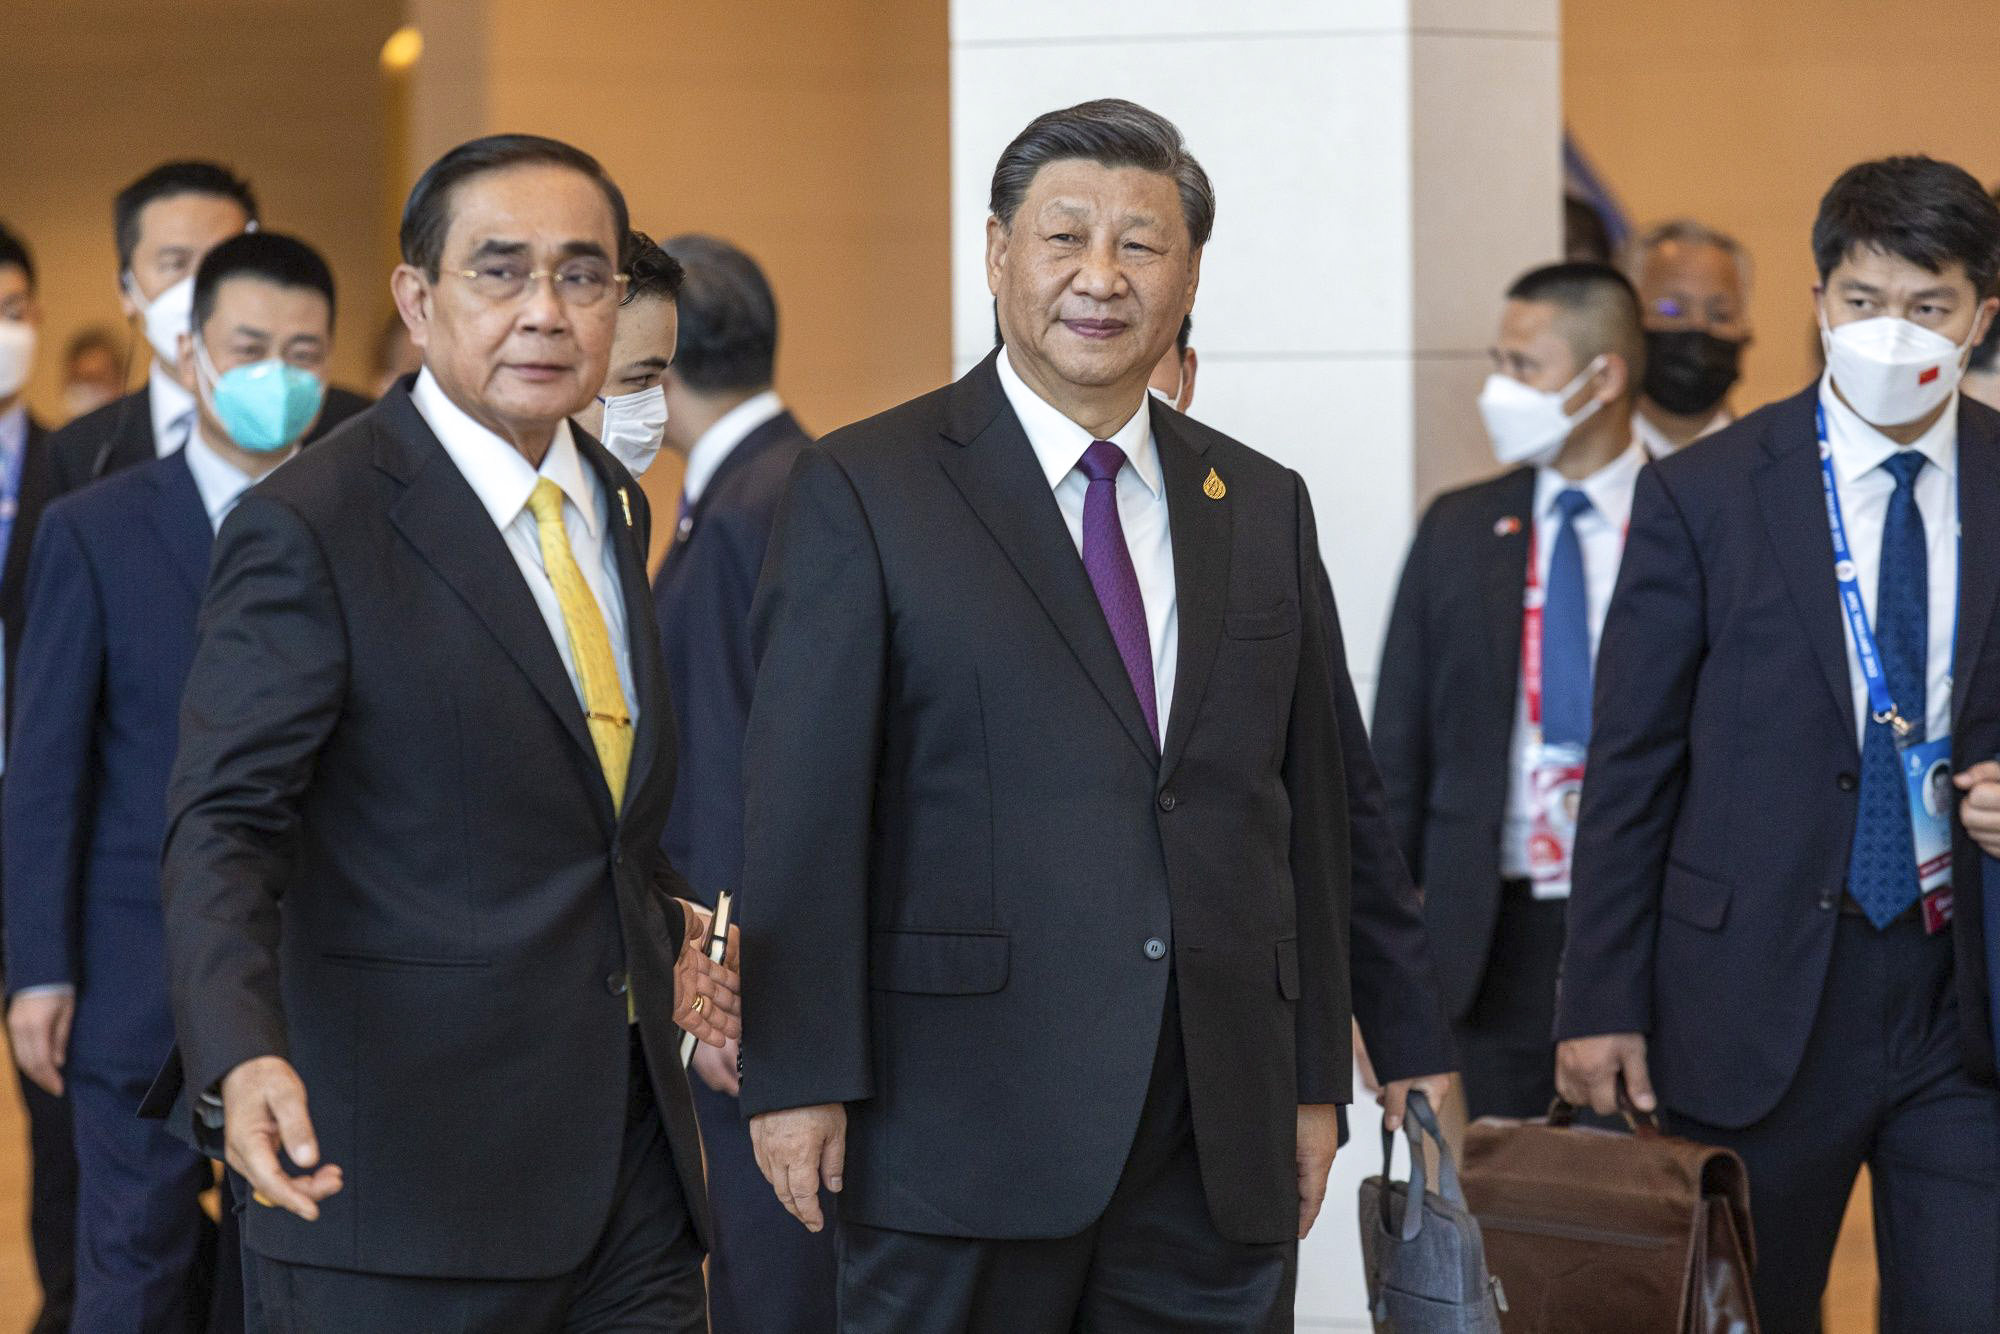 Thai Prime Minister Prayuth Chan-ocha and Chinese President Xi Jinping arrive at the Asia-Pacific Economic Cooperation summit in Bangkok on Friday. Photo: Bloomberg